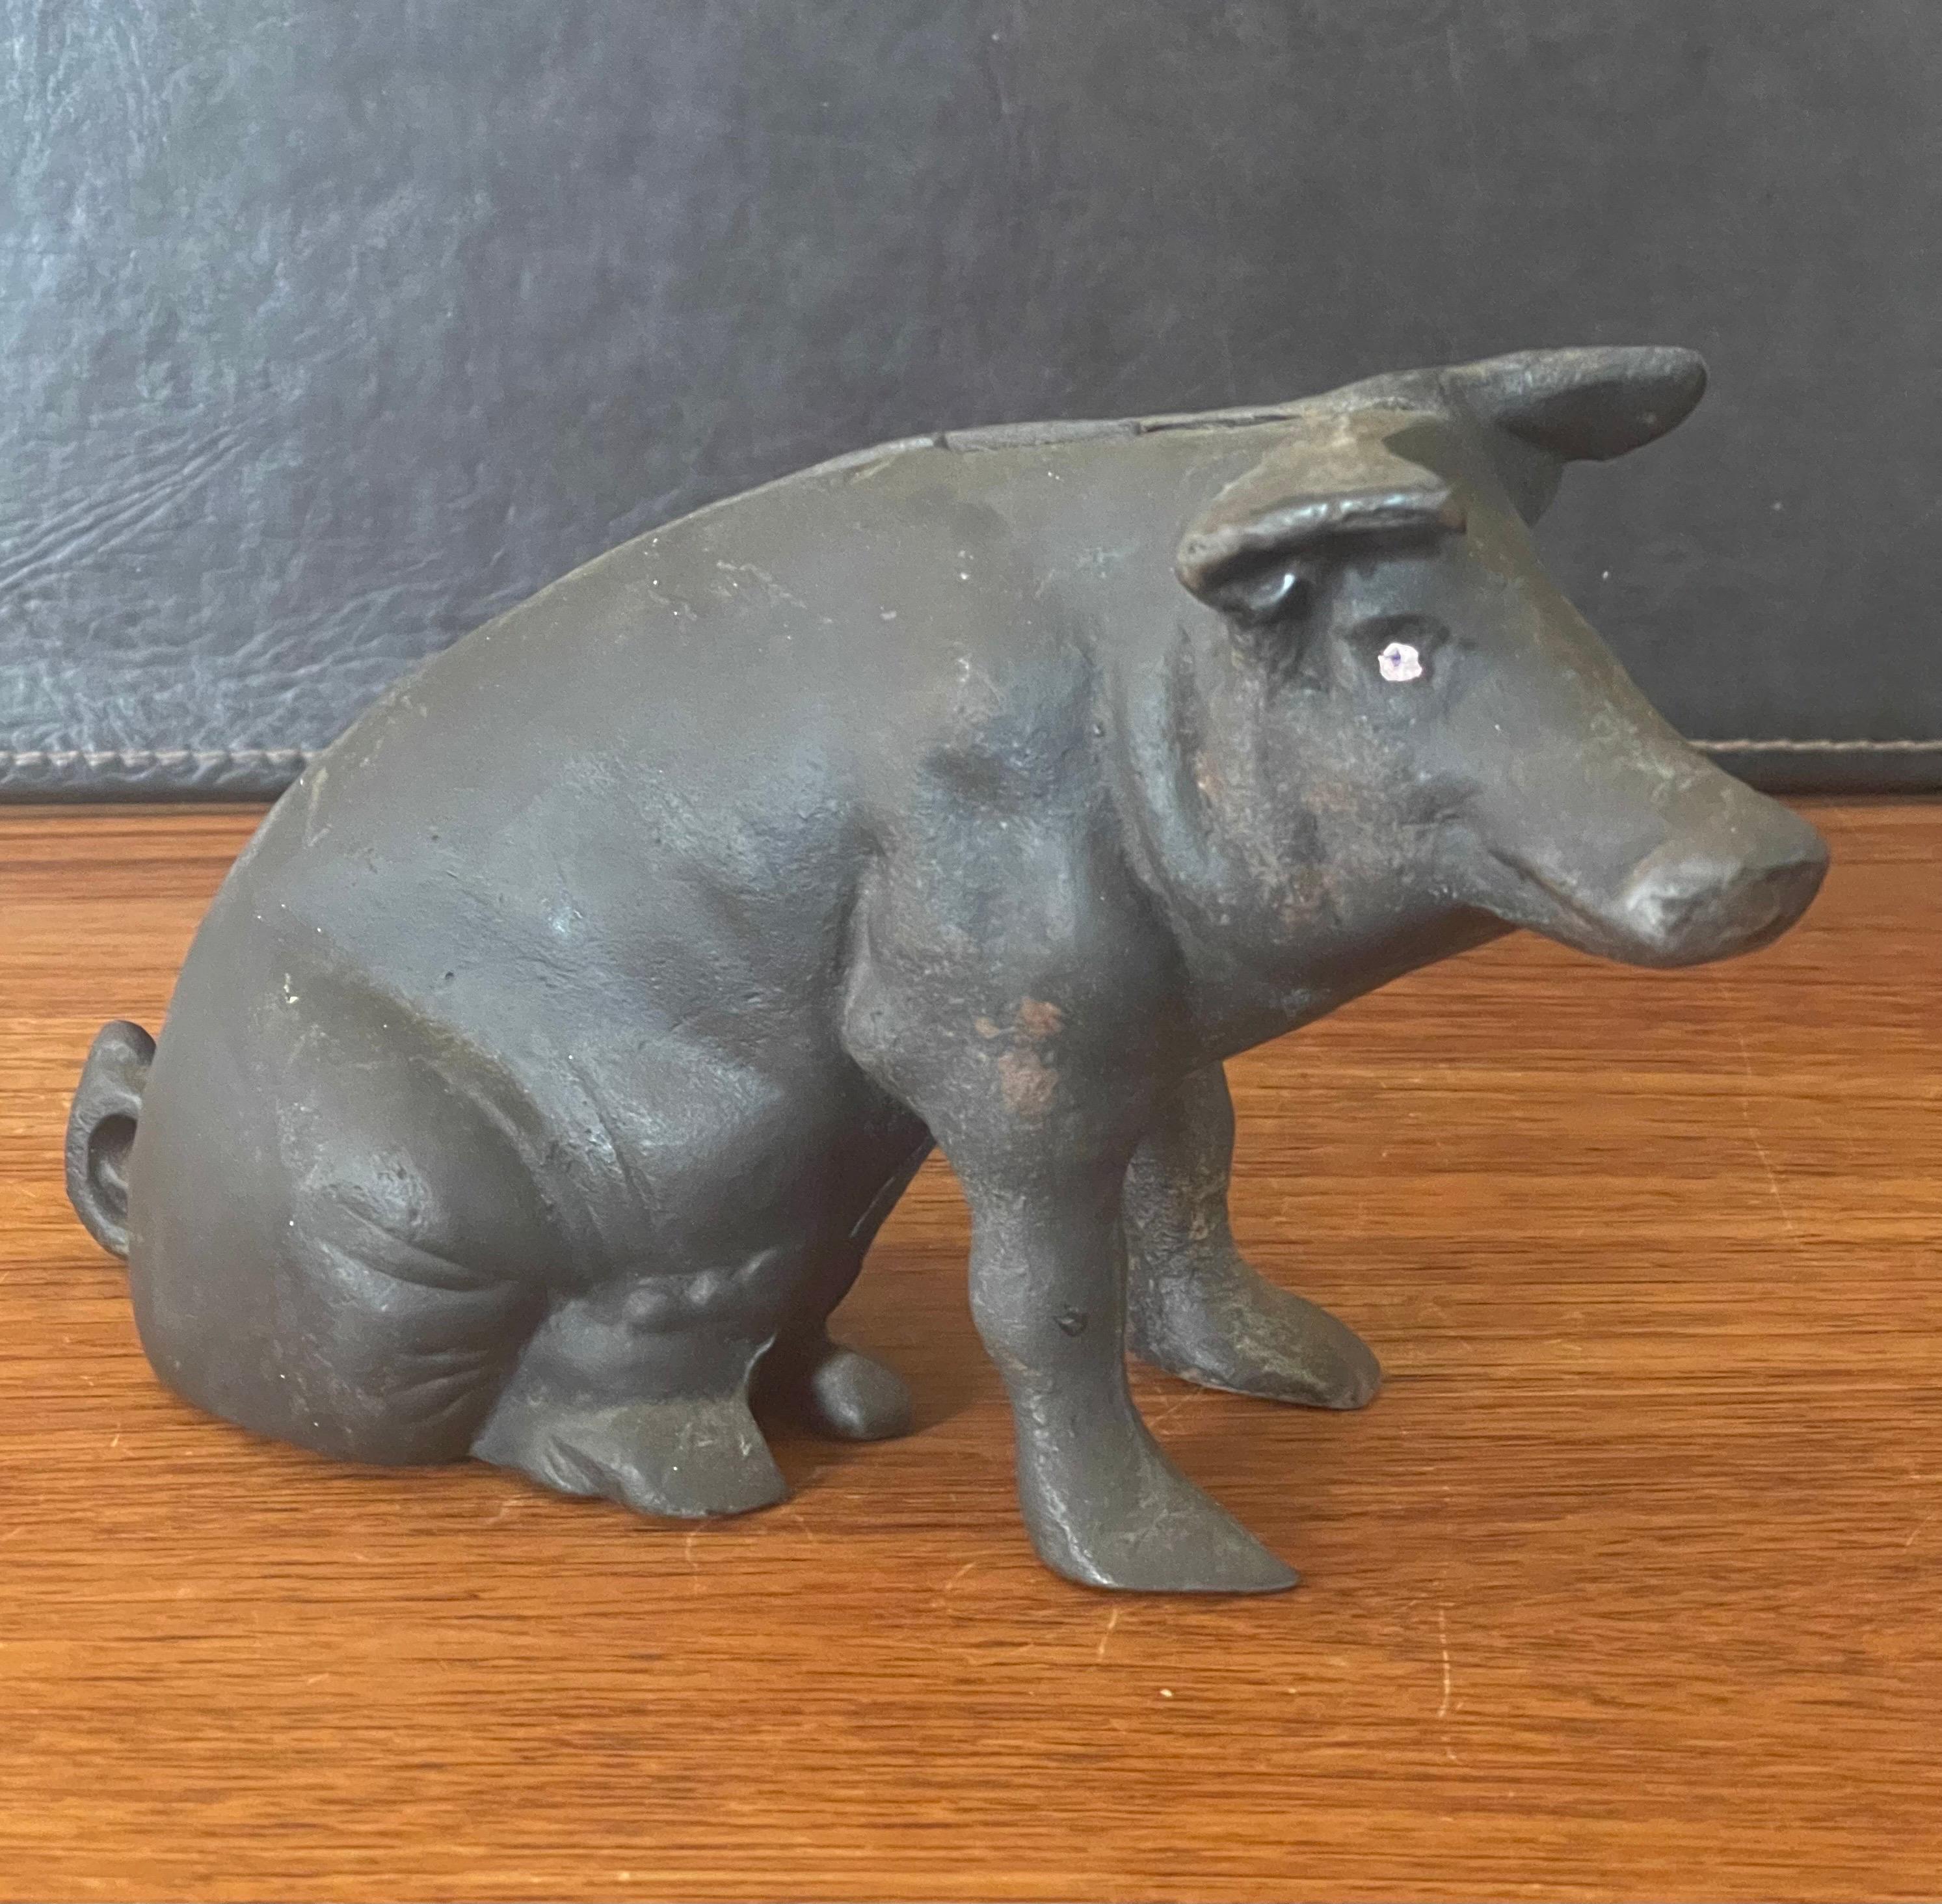 New Vintage Antique Cast Iron Coin Bank Figurine Painted Black & White Pig 04616 